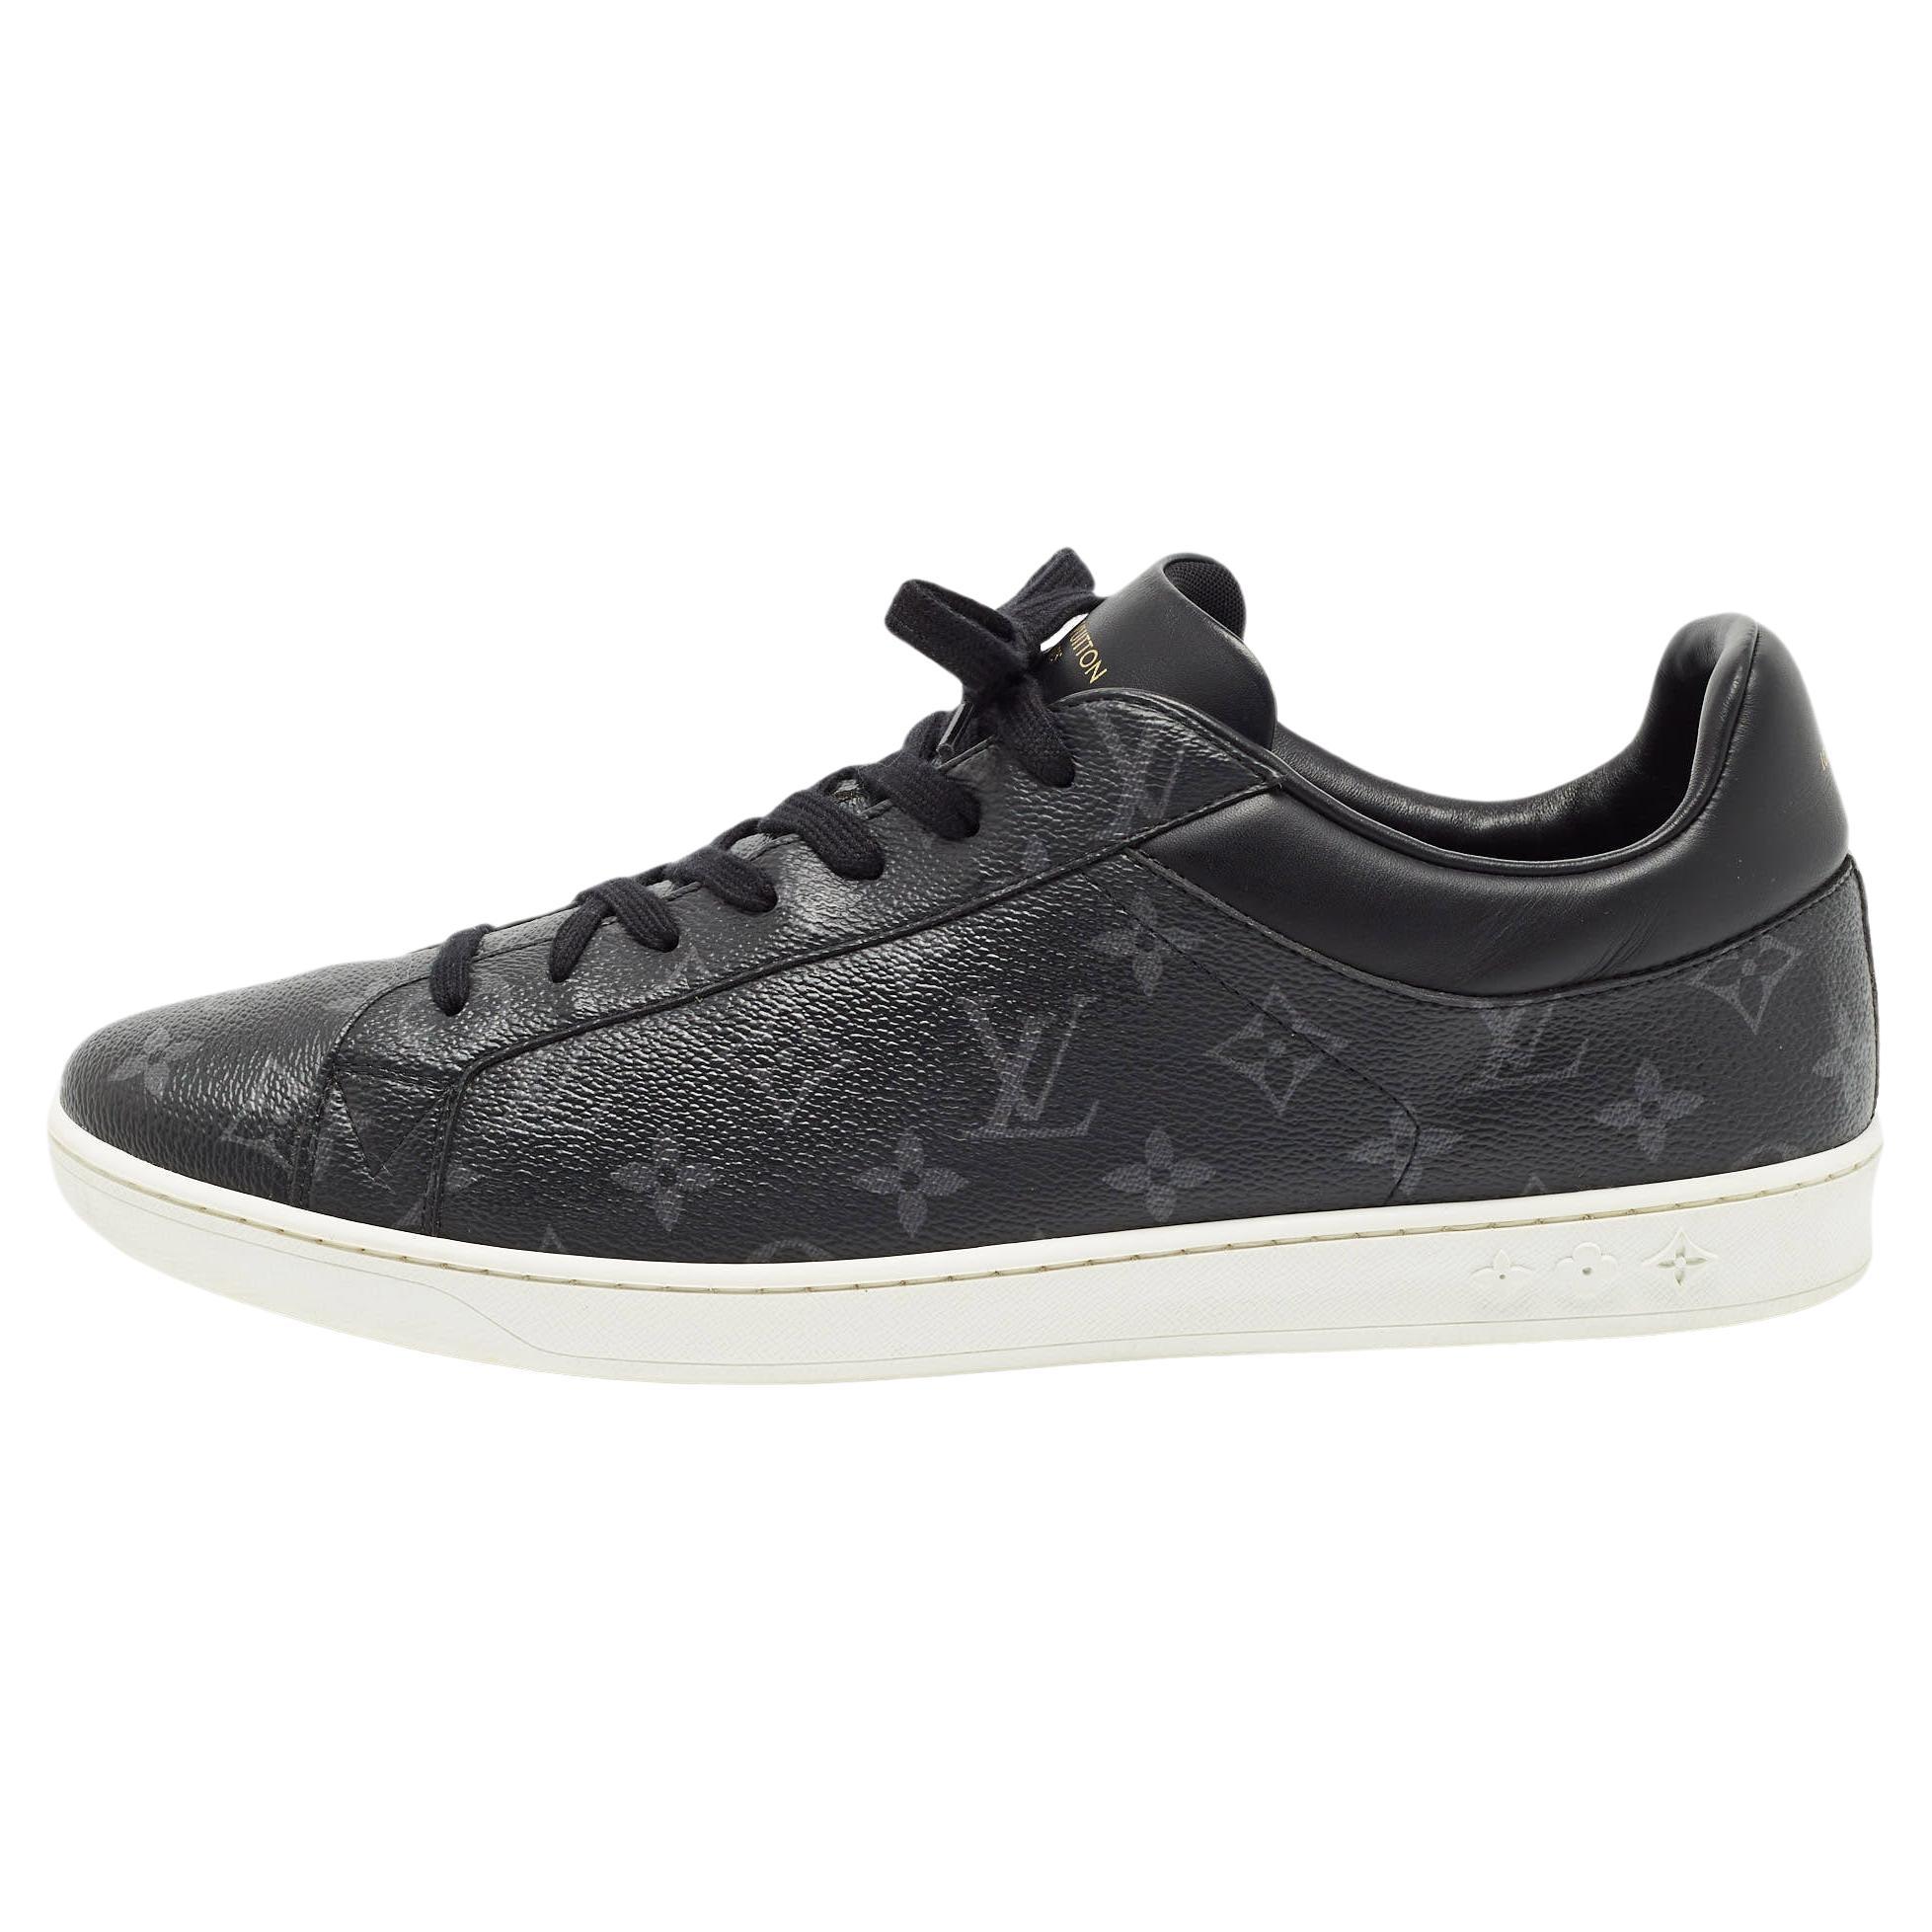 Louis Vuitton Monogram Eclipse Luxembourg Sneakers Size 46 For Sale